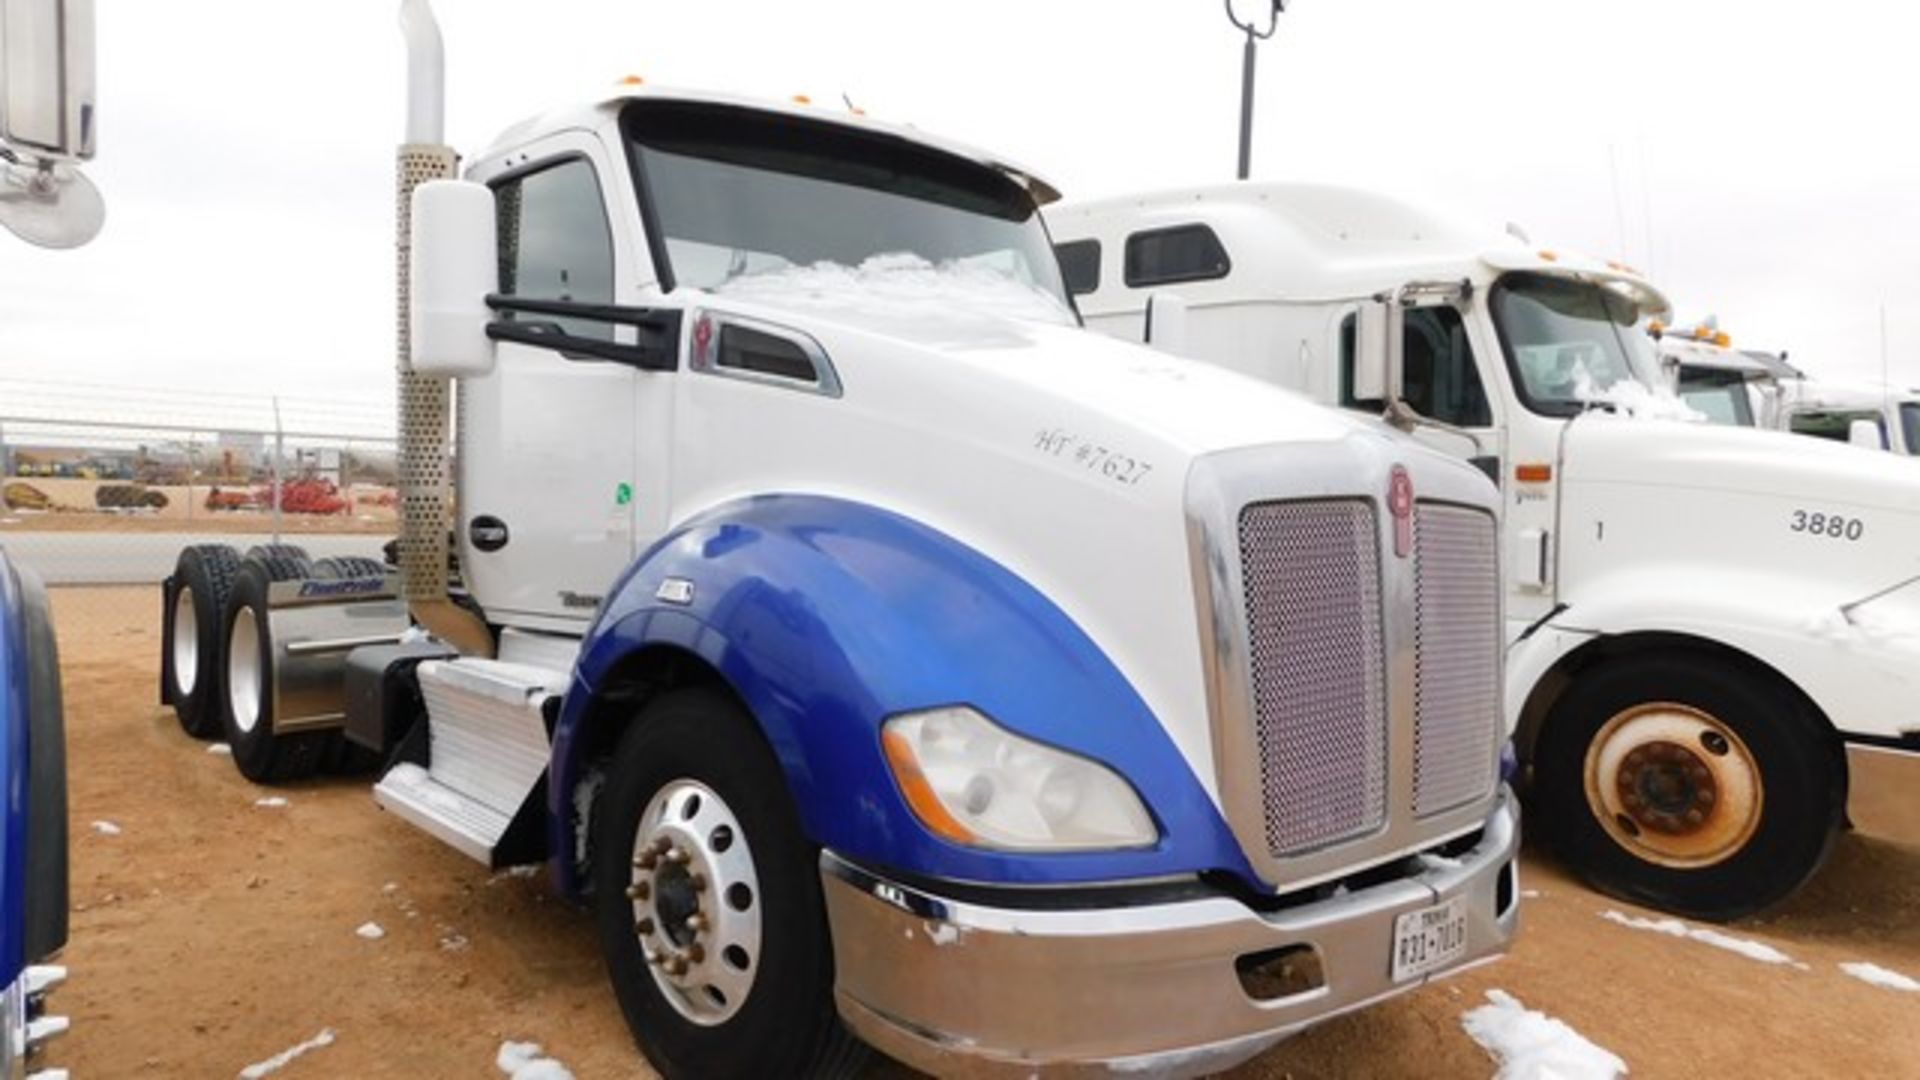 Located in YARD 1 - Midland, TX (6293) (X) 2015 KENWORTH T680 T/A DAY CAB HAUL T - Image 2 of 8